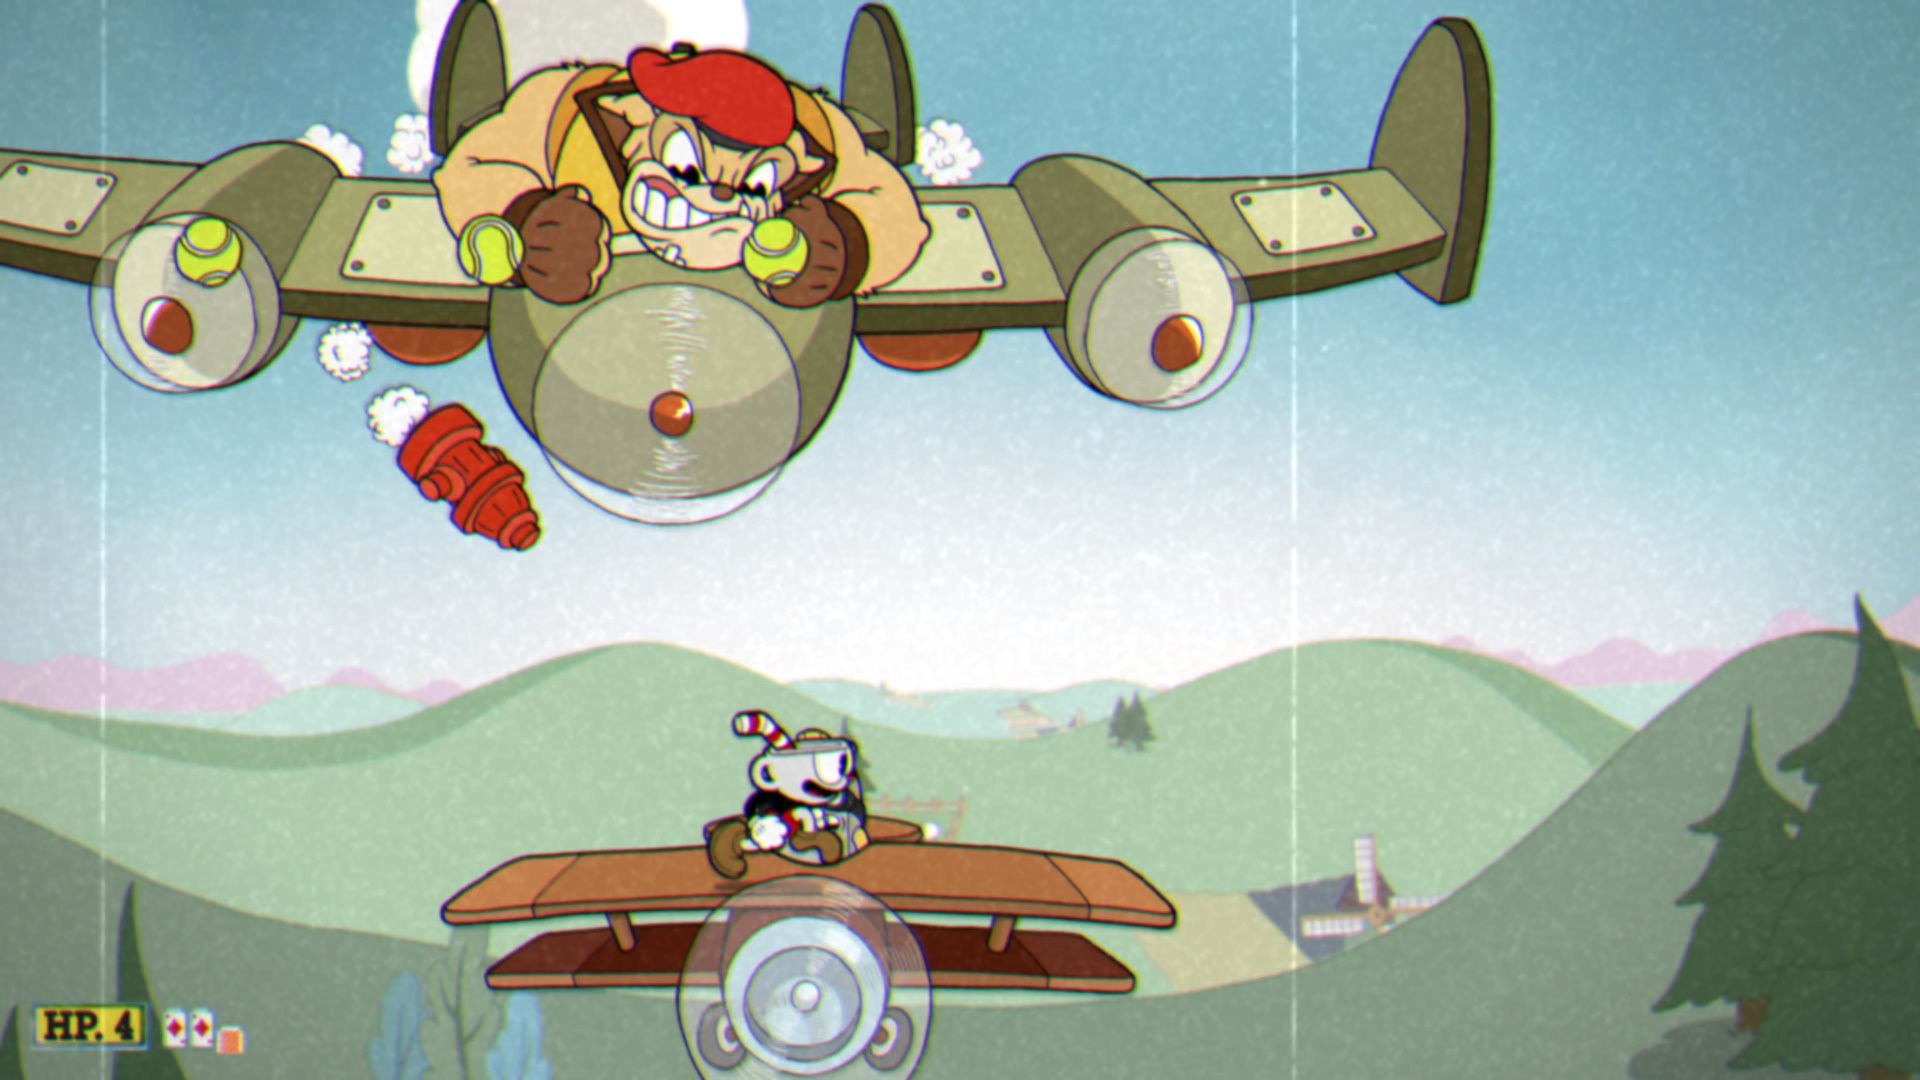 Cuphead The Delicious Course, The Howling Aces, Phase 1, Fire Hydrant attack incoming